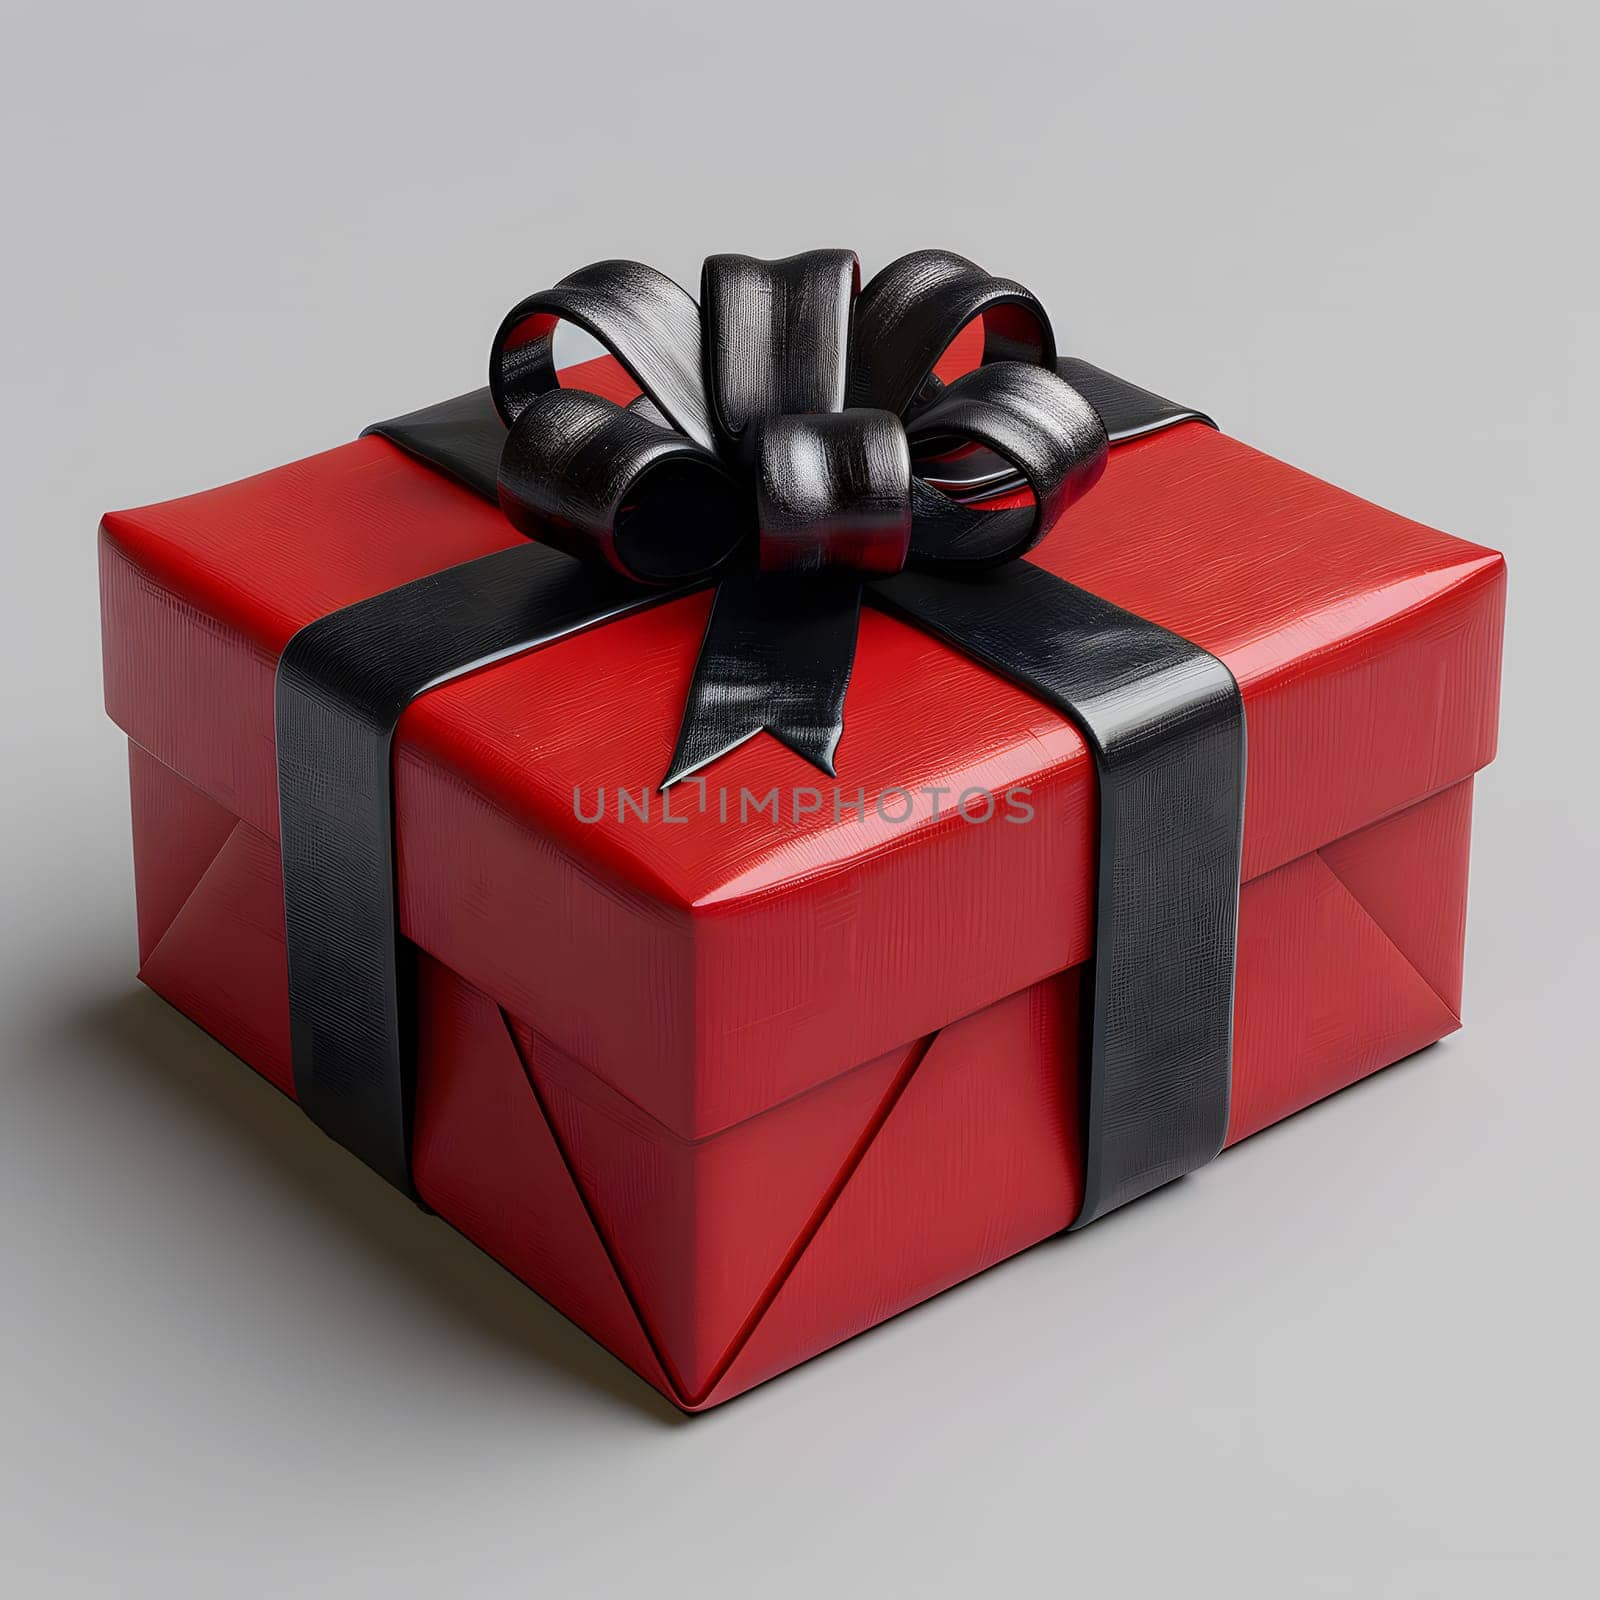 Elegant rectangular red gift box adorned with a sleek black ribbon and bow, perfect for packaging and labeling a present for any special event